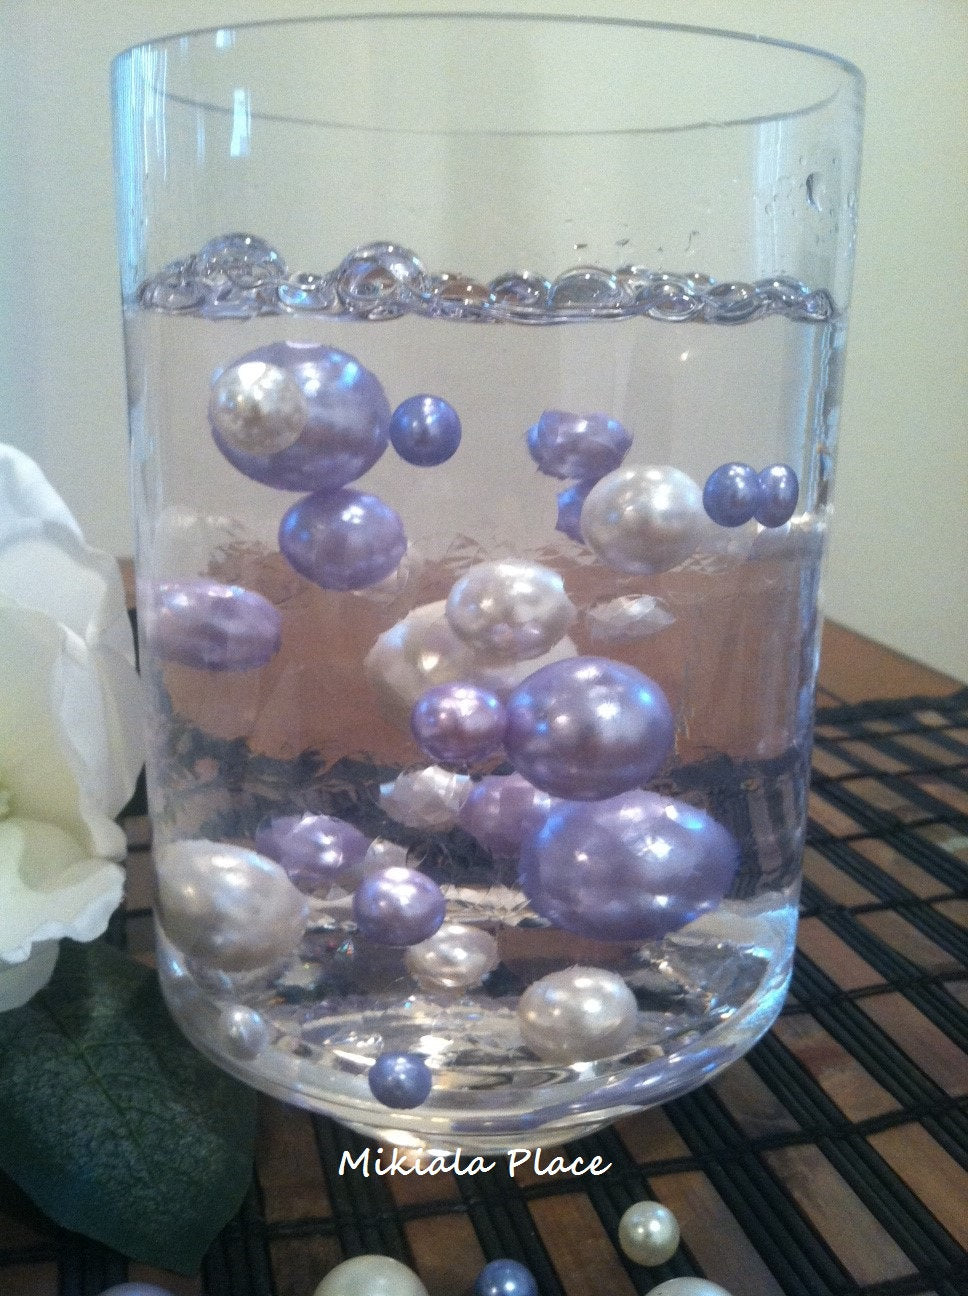 Bungalow Daisy Floating Teal Blue/Light Blue Pearls Centerpieces 80pcs Mix Size Pearls, Size: 10-30mm.